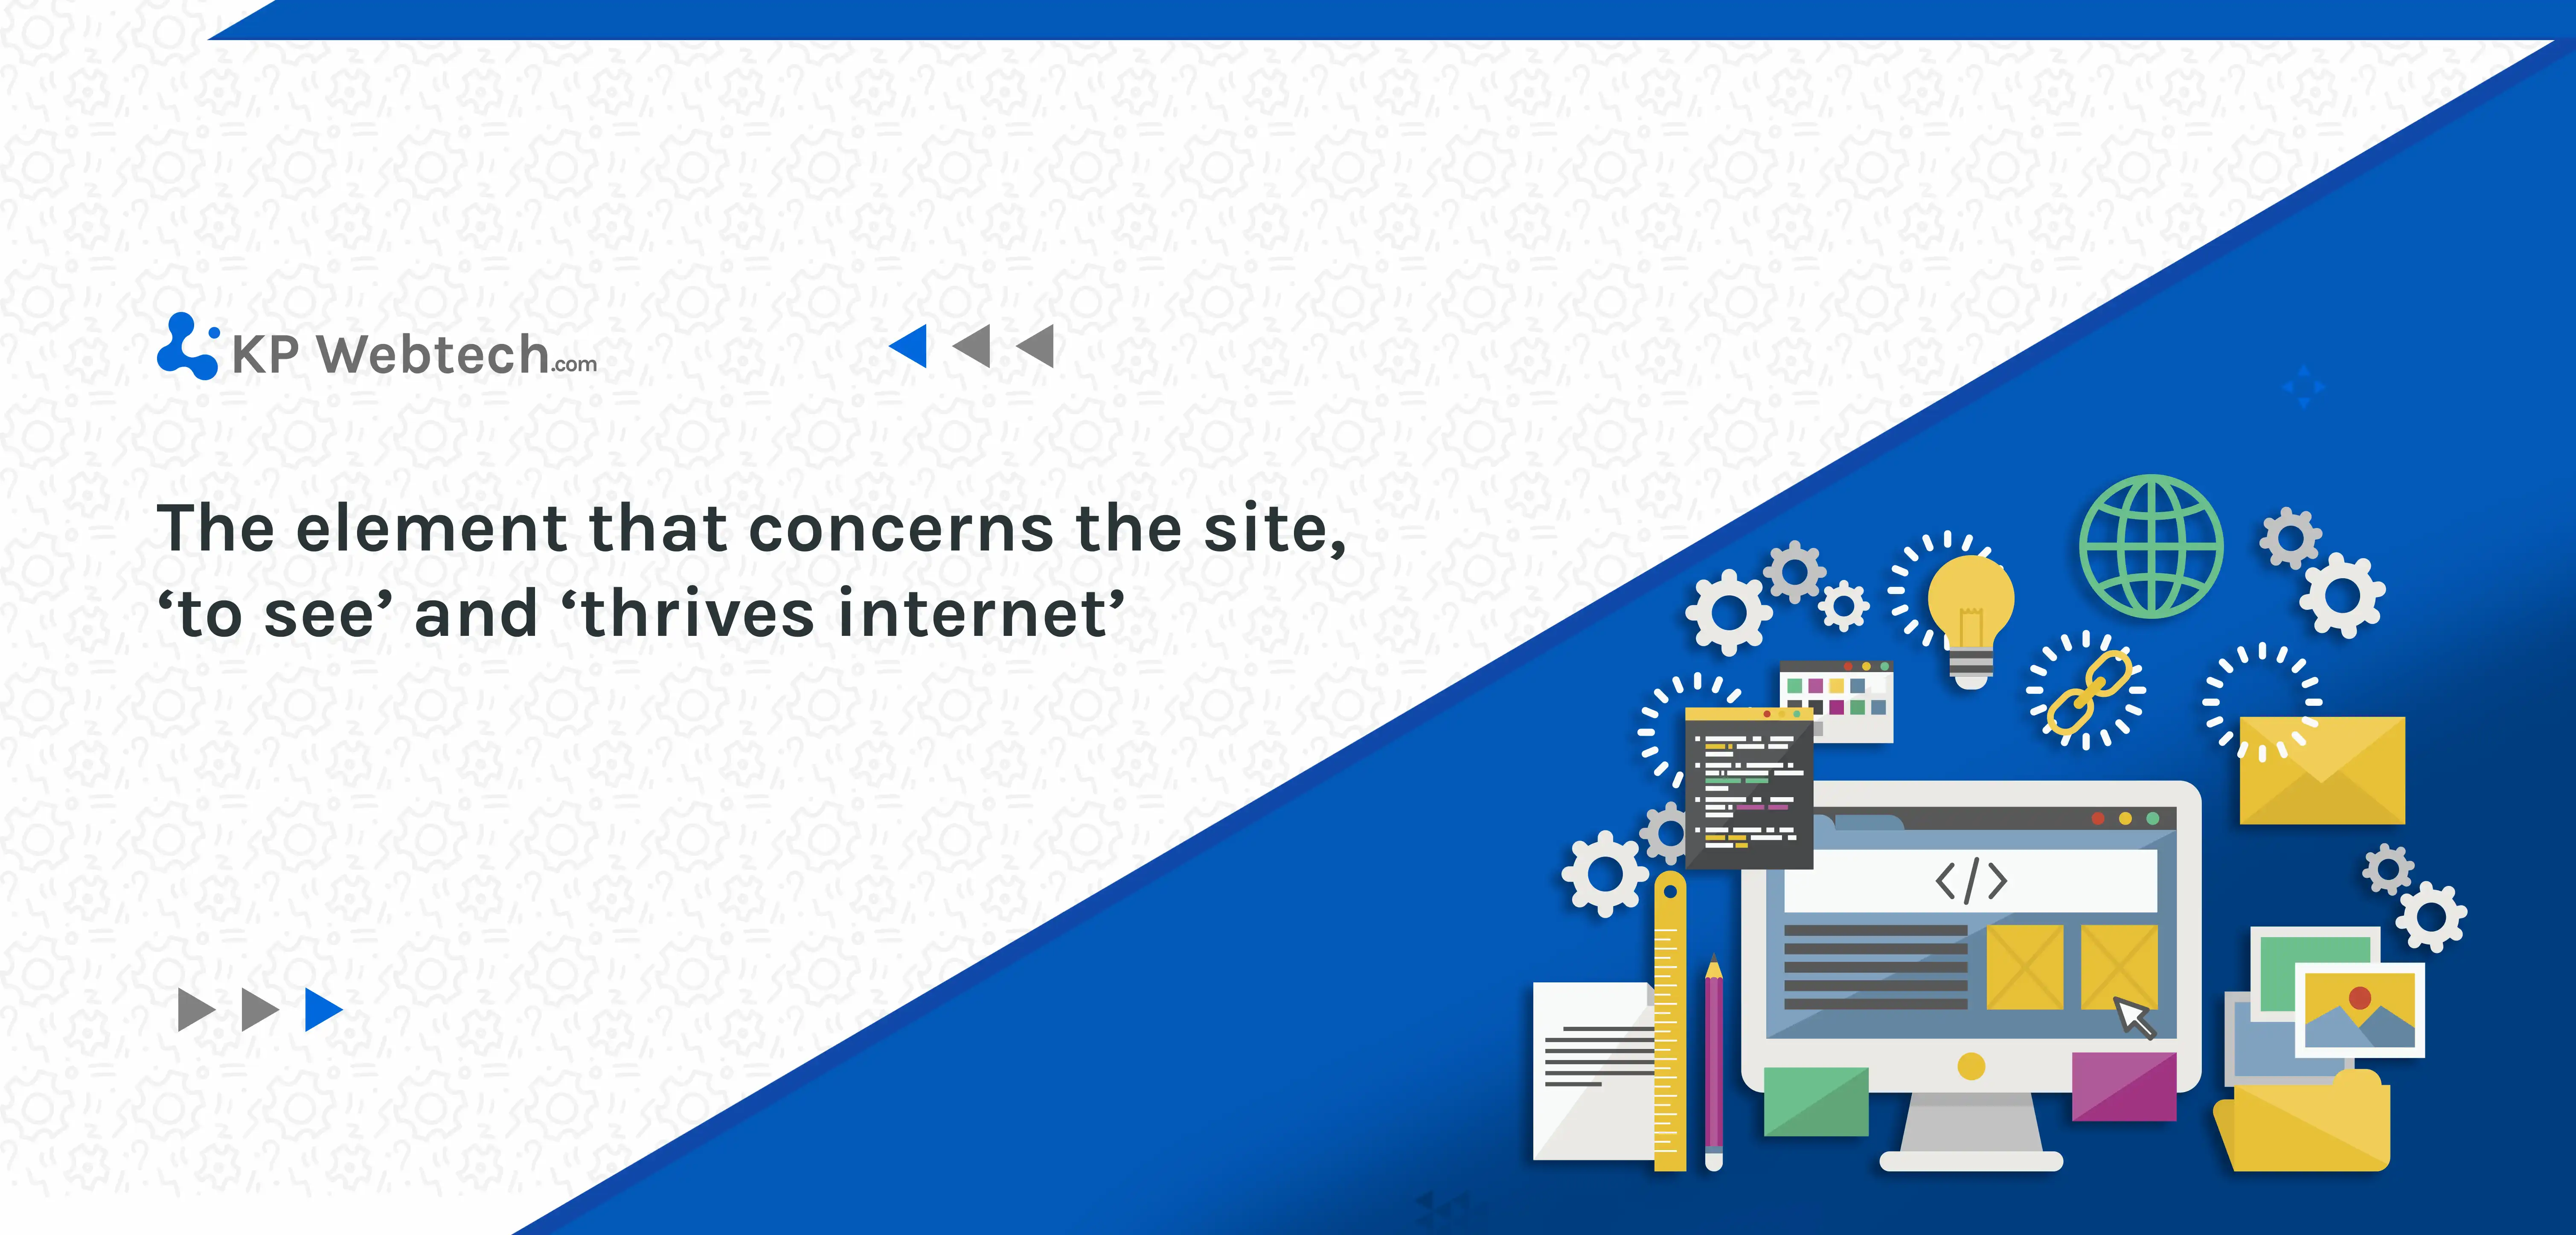 The element that concerns the site, ‘to see’ and ‘thrives internet’